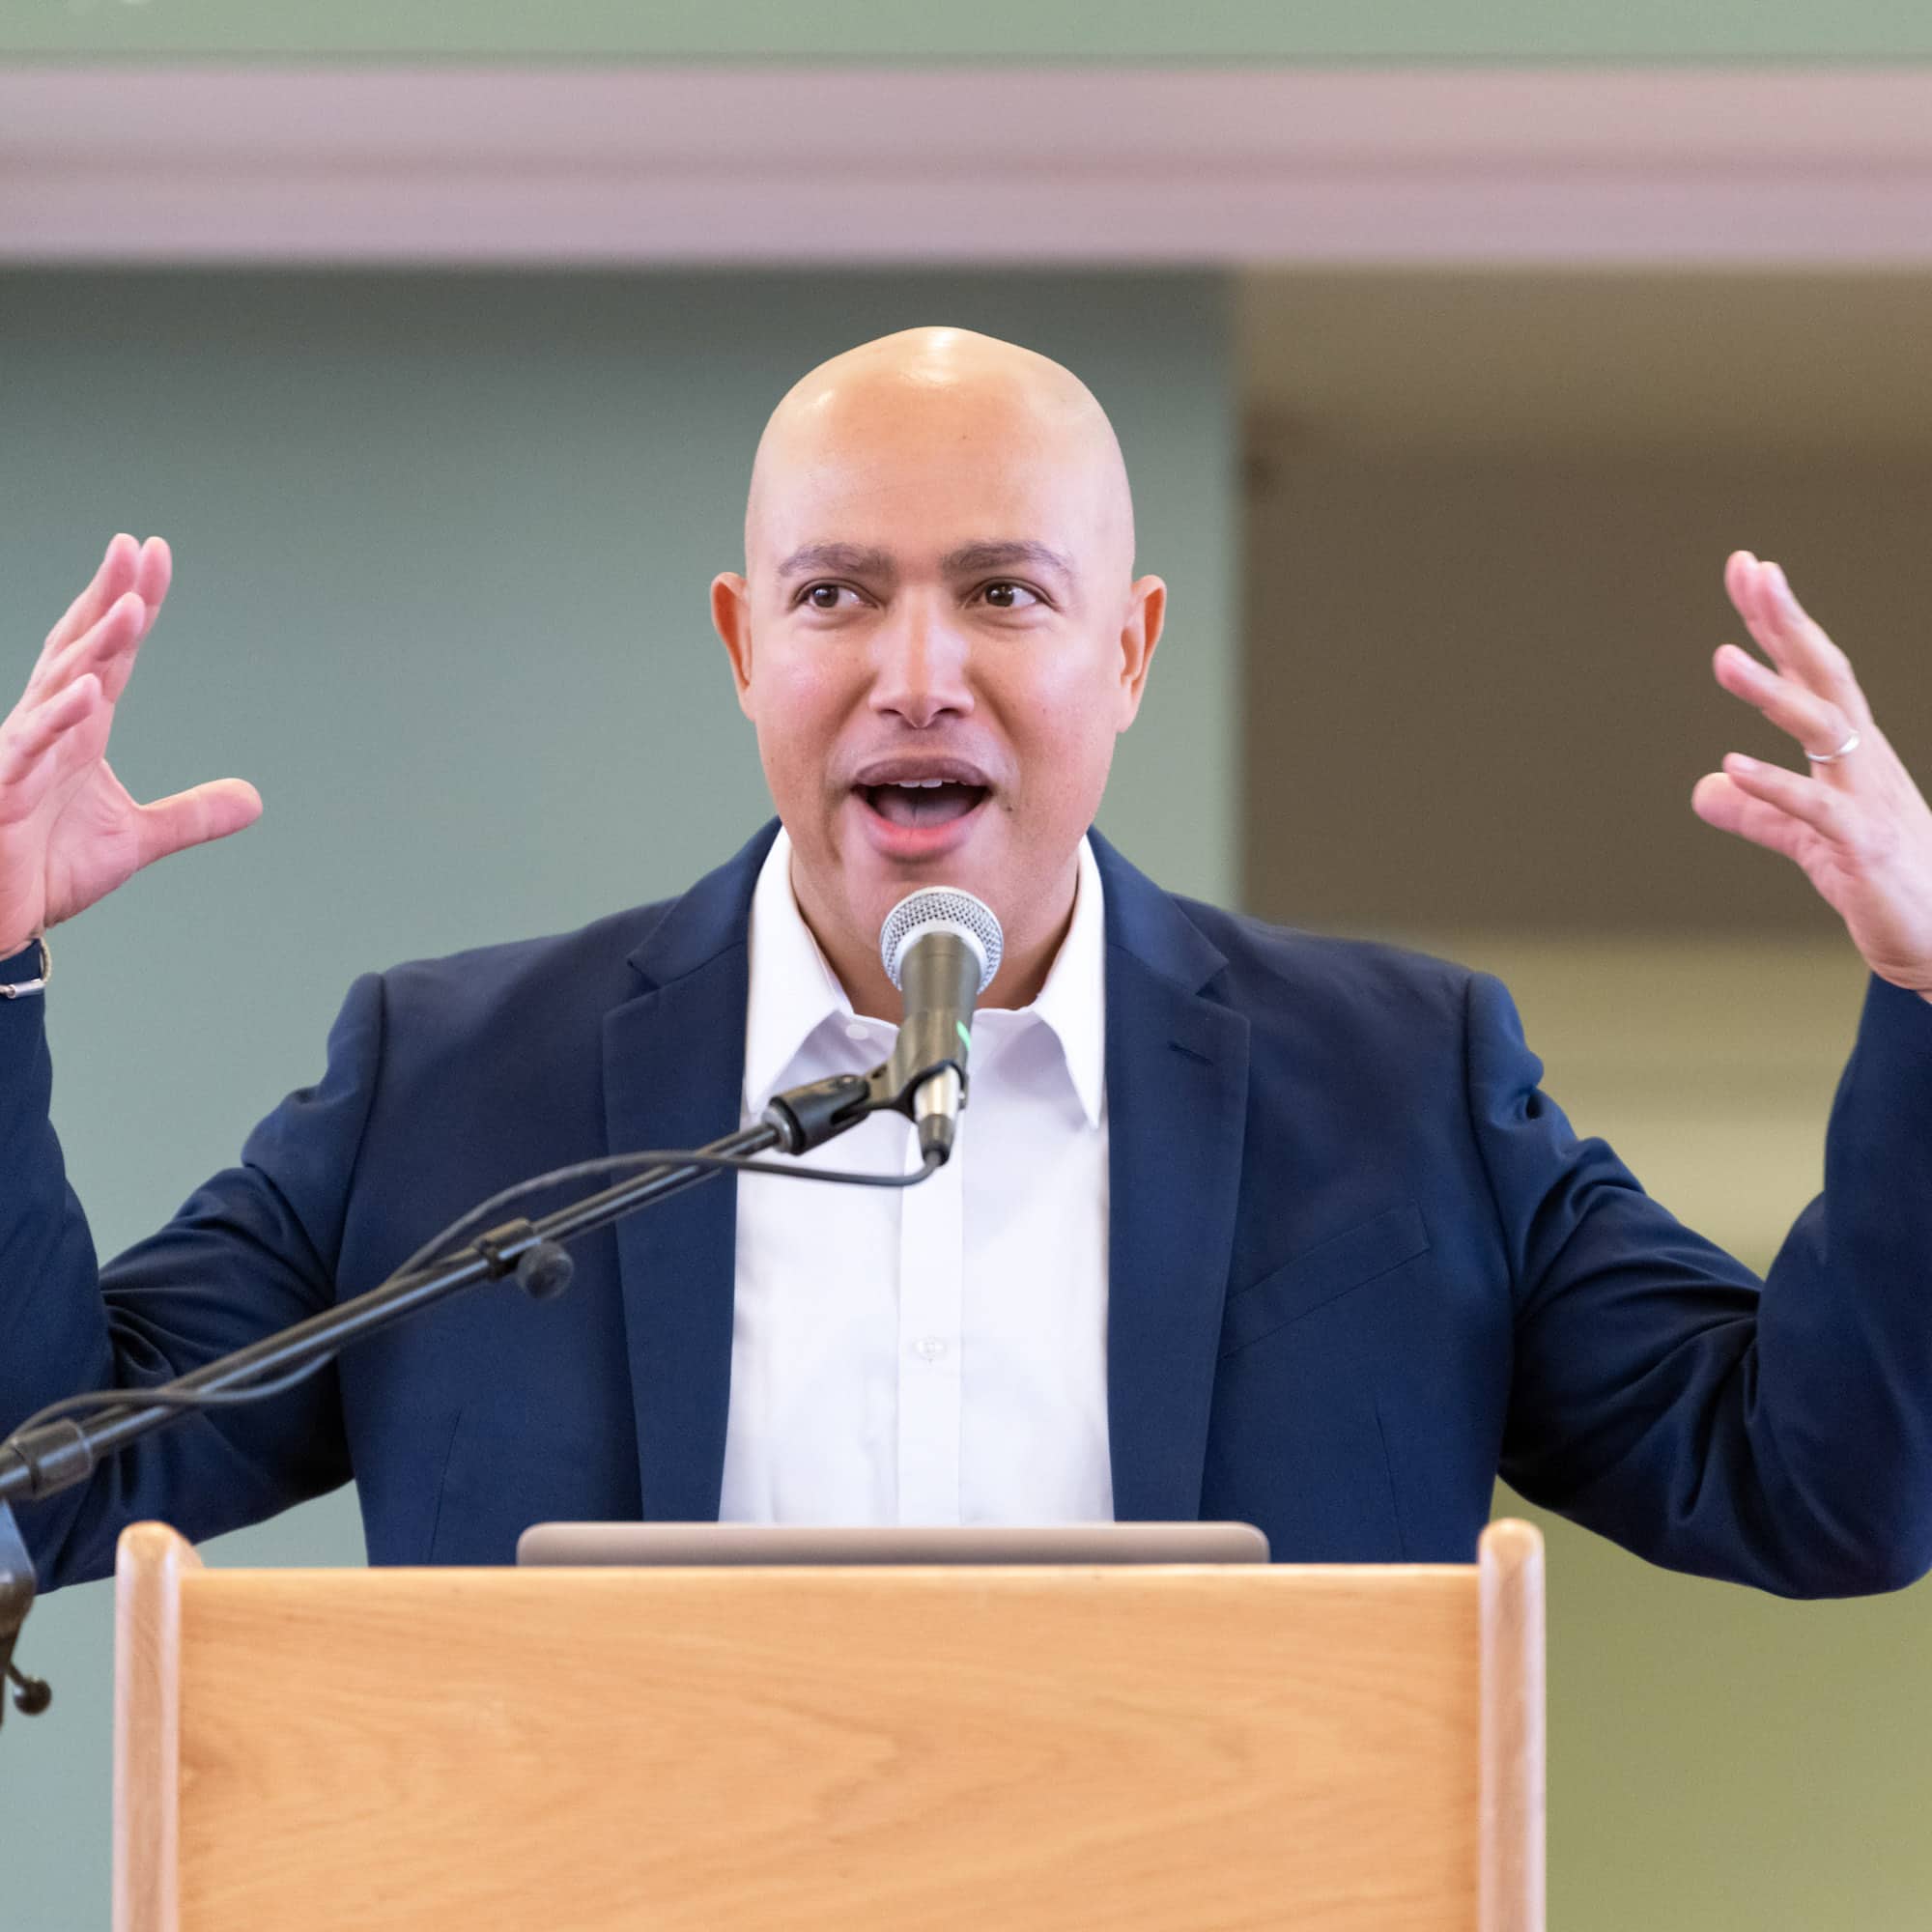 A person who is bald wearing a formal blue jacket and white collared shirt stands in front of a microphone speaking and gesticulating.